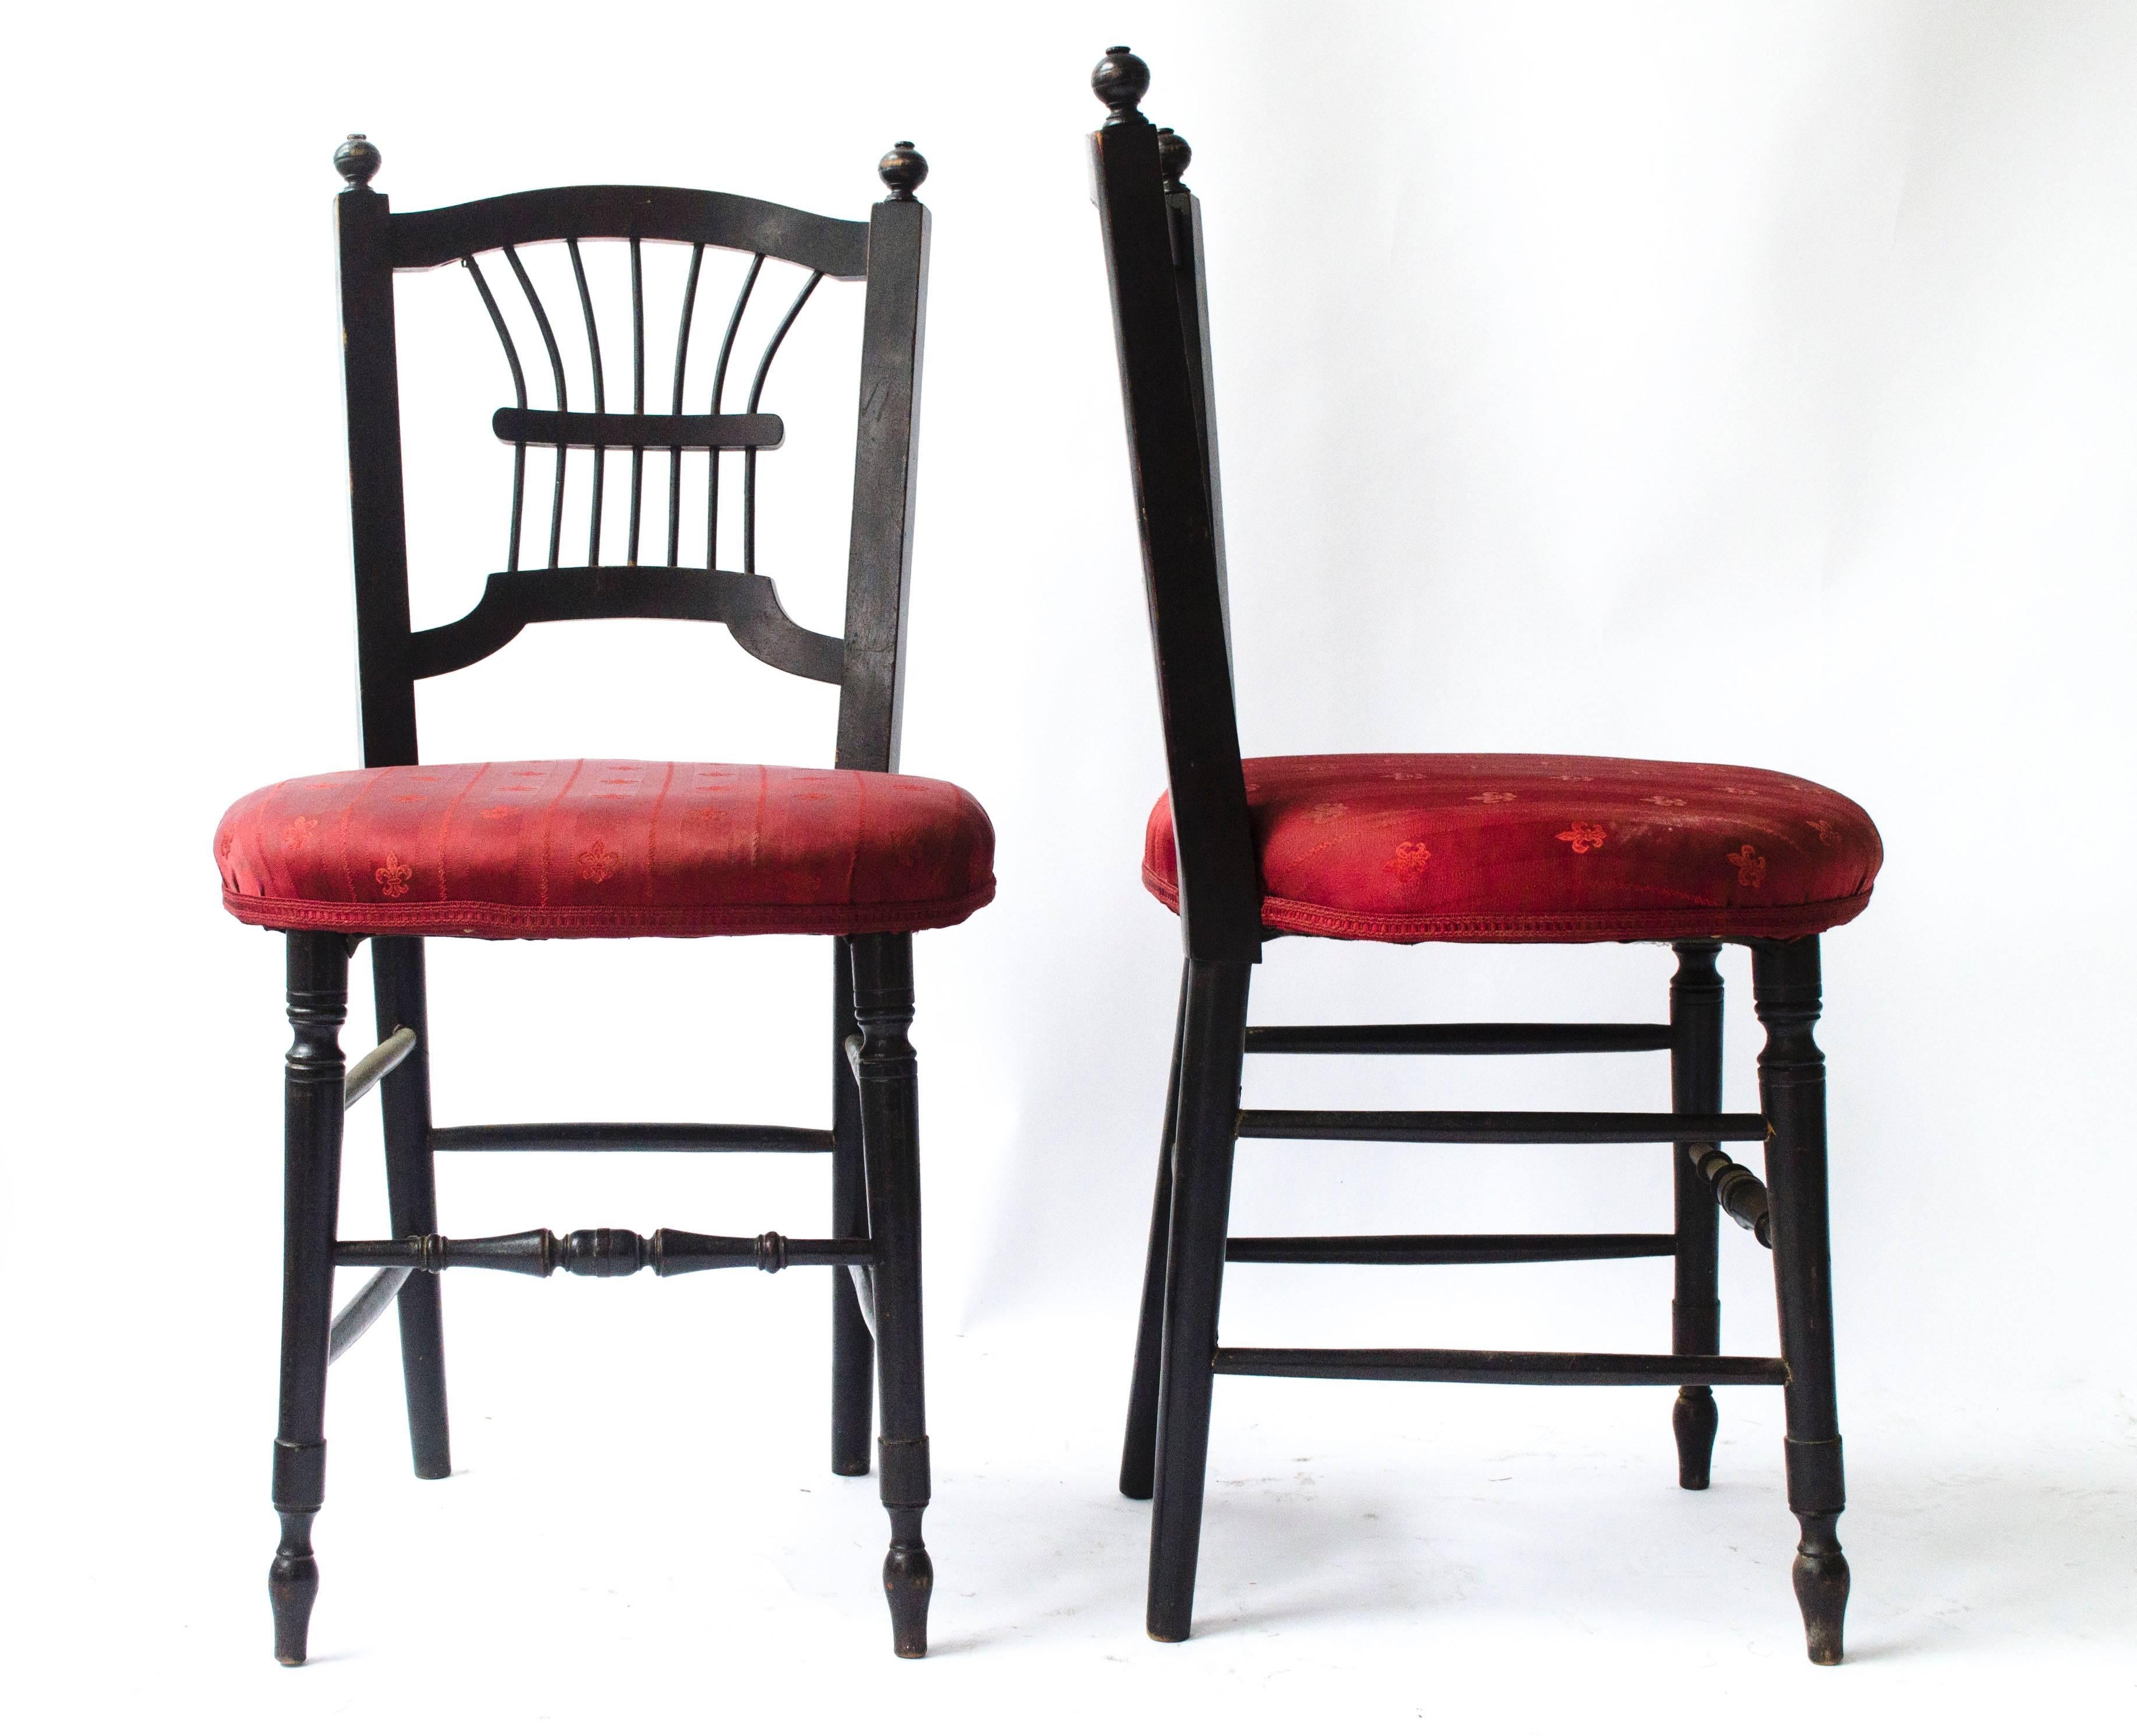 Morris and Co 
A pair of Aesthetic Movement ebonised side chairs from the Sussex range designed by Dante Gabriel Rossetti with fine fan back spindles and turned legs, originally had rush seats now upholstered.
We can have new rush seats laid if